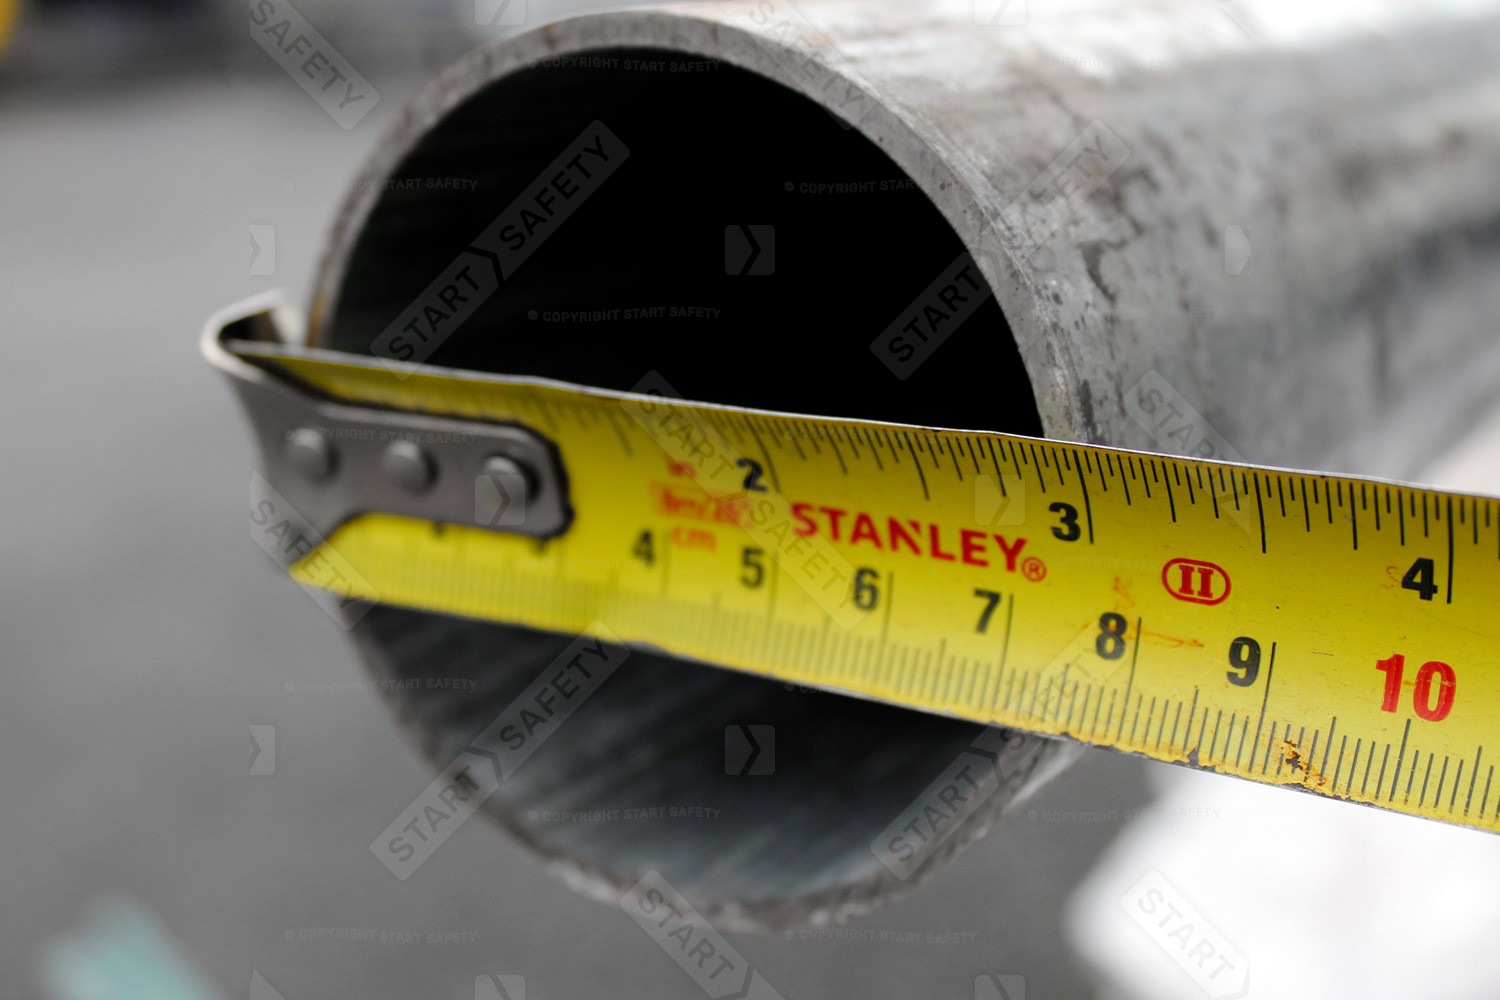 Measuring the diamter of a post